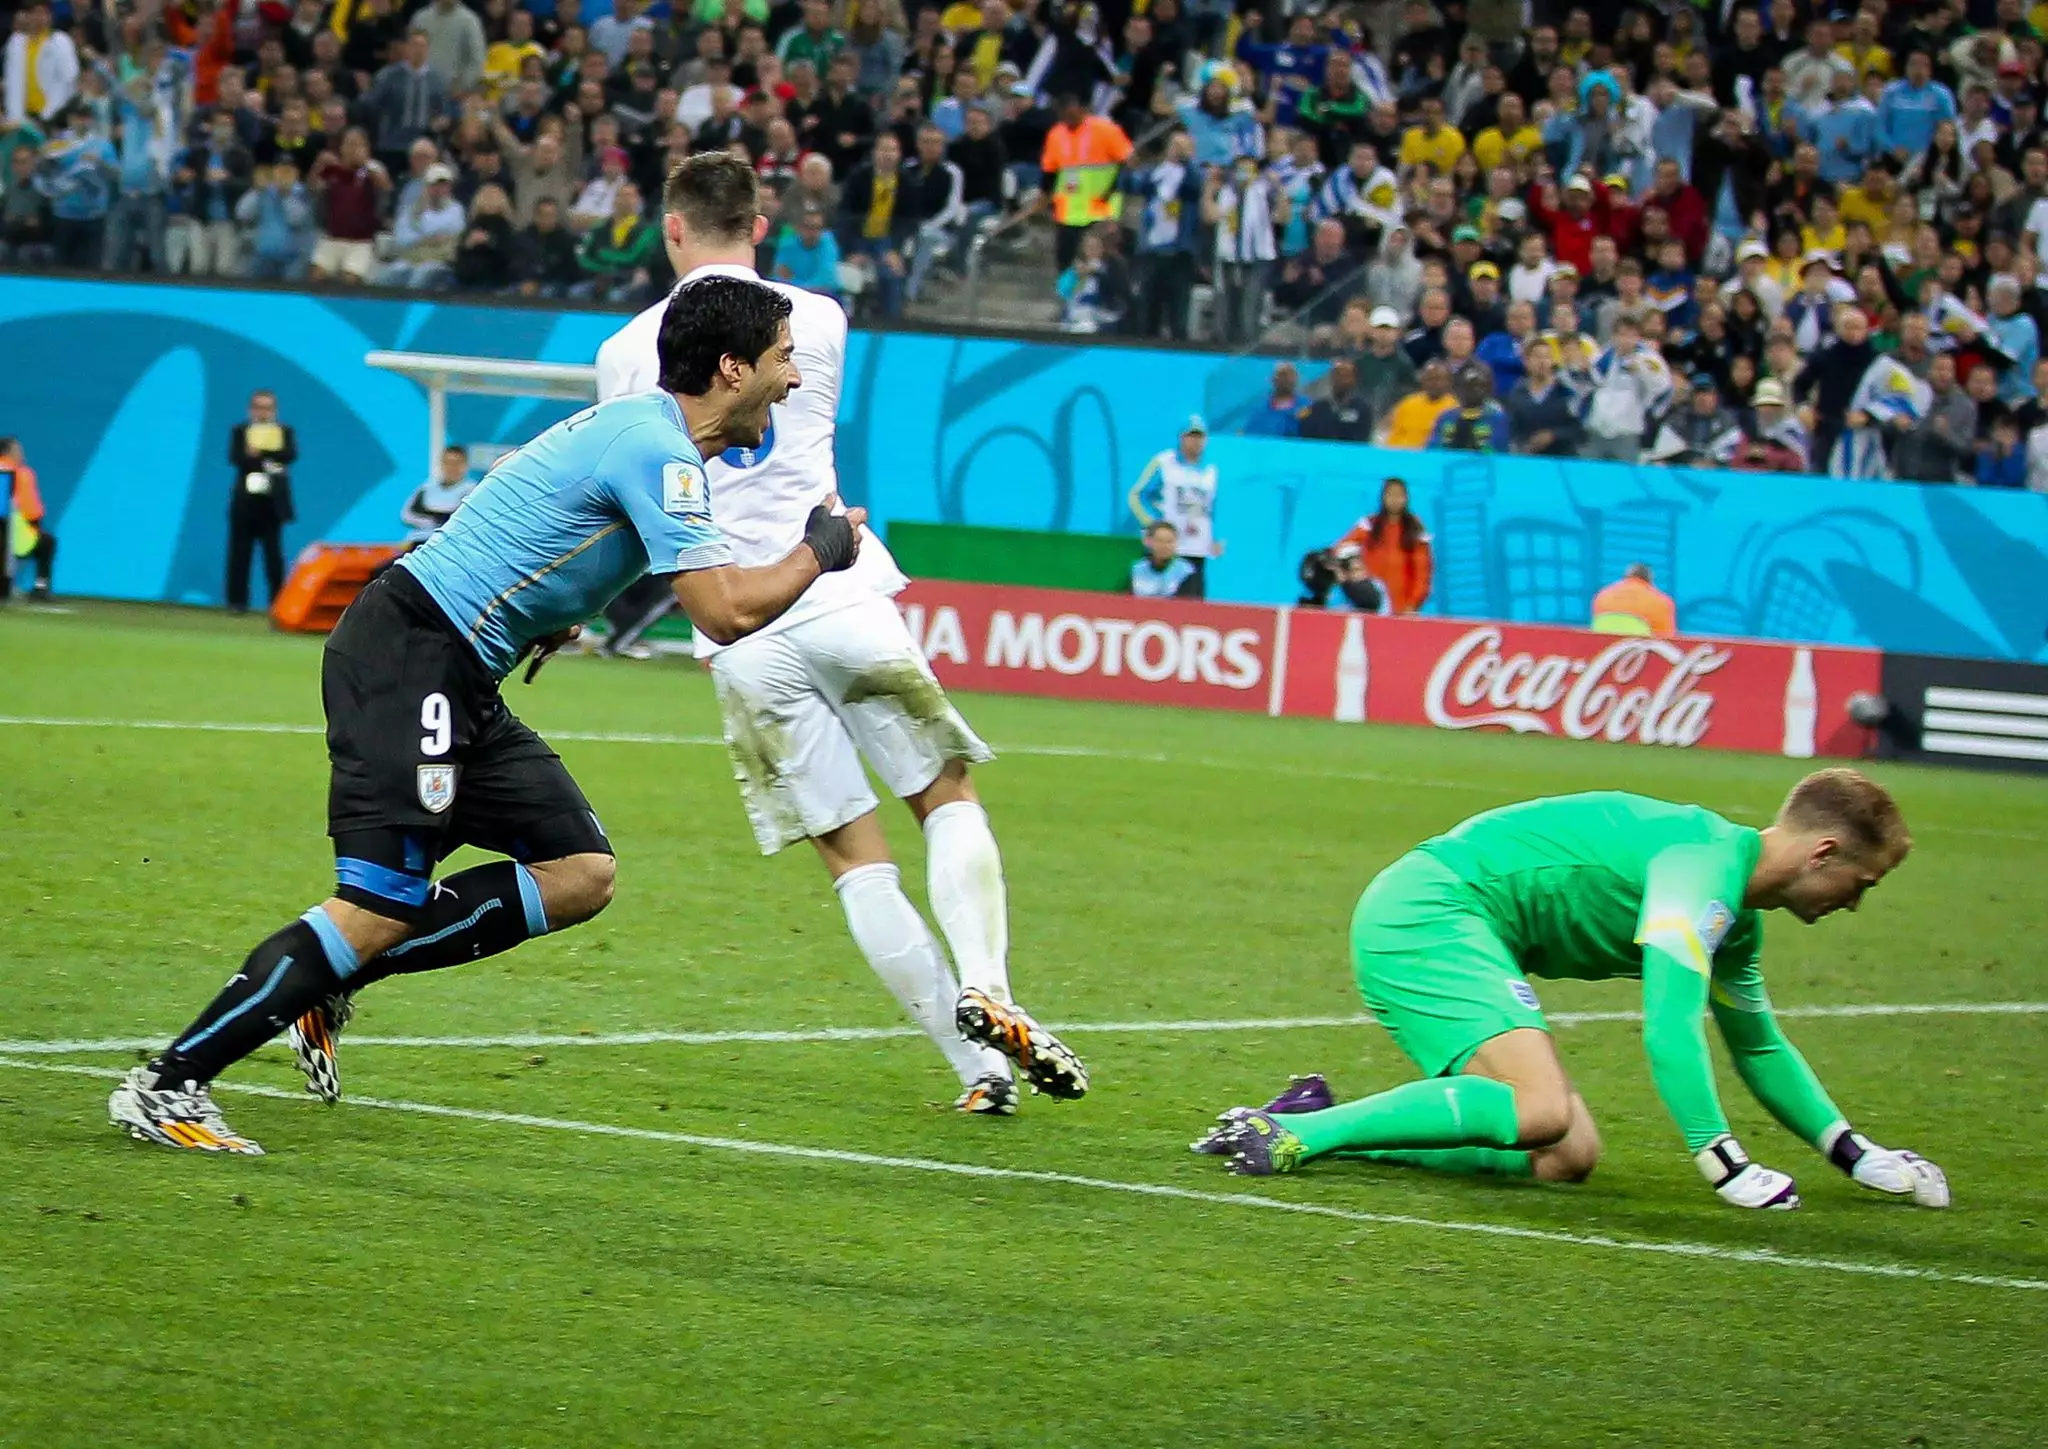 Suarez bags the winner against England four years ago. Image: PA Images